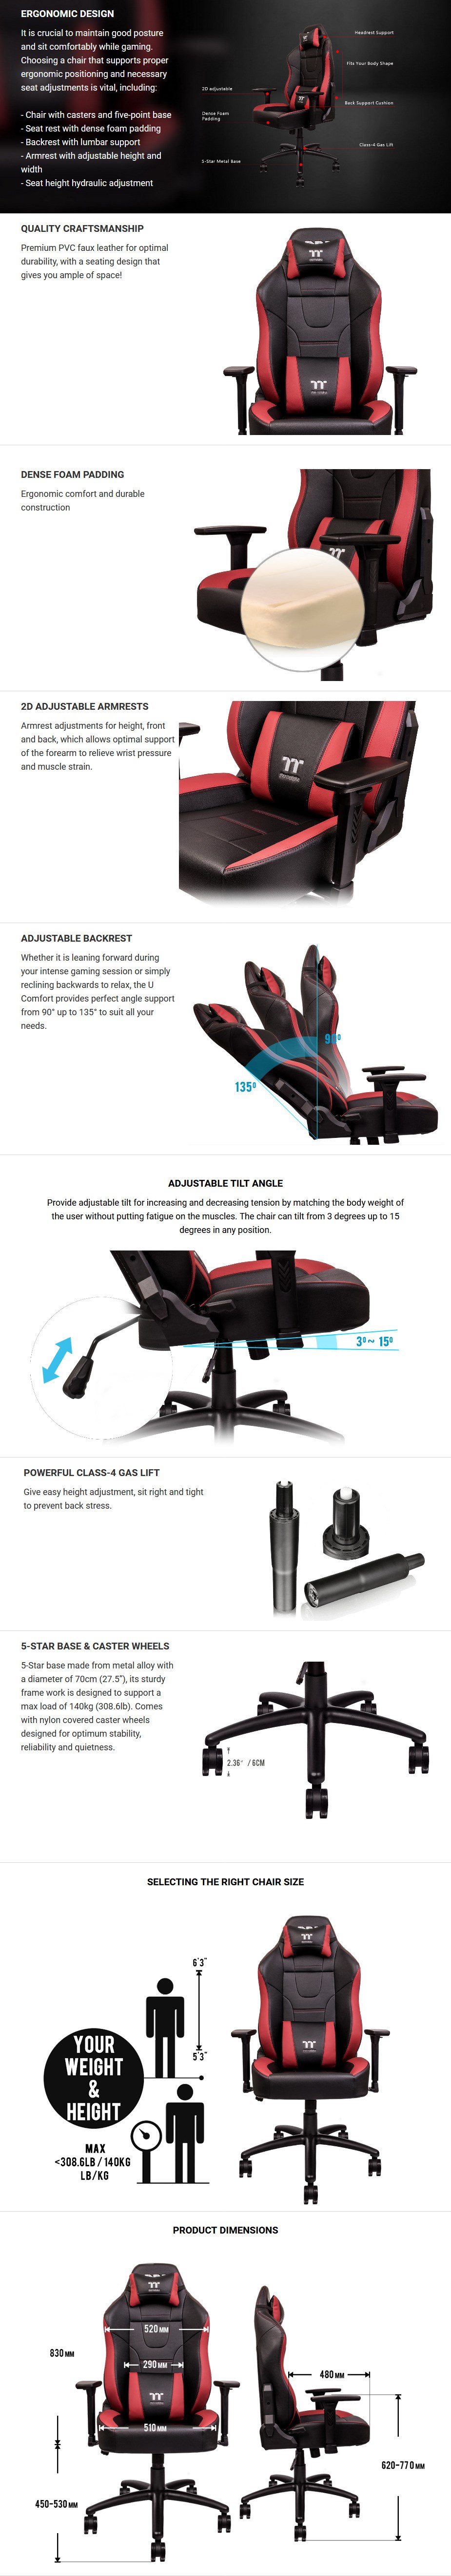 Thermaltake Gaming U Comfort Office/Gaming Chair - Black/Red - Overview 1